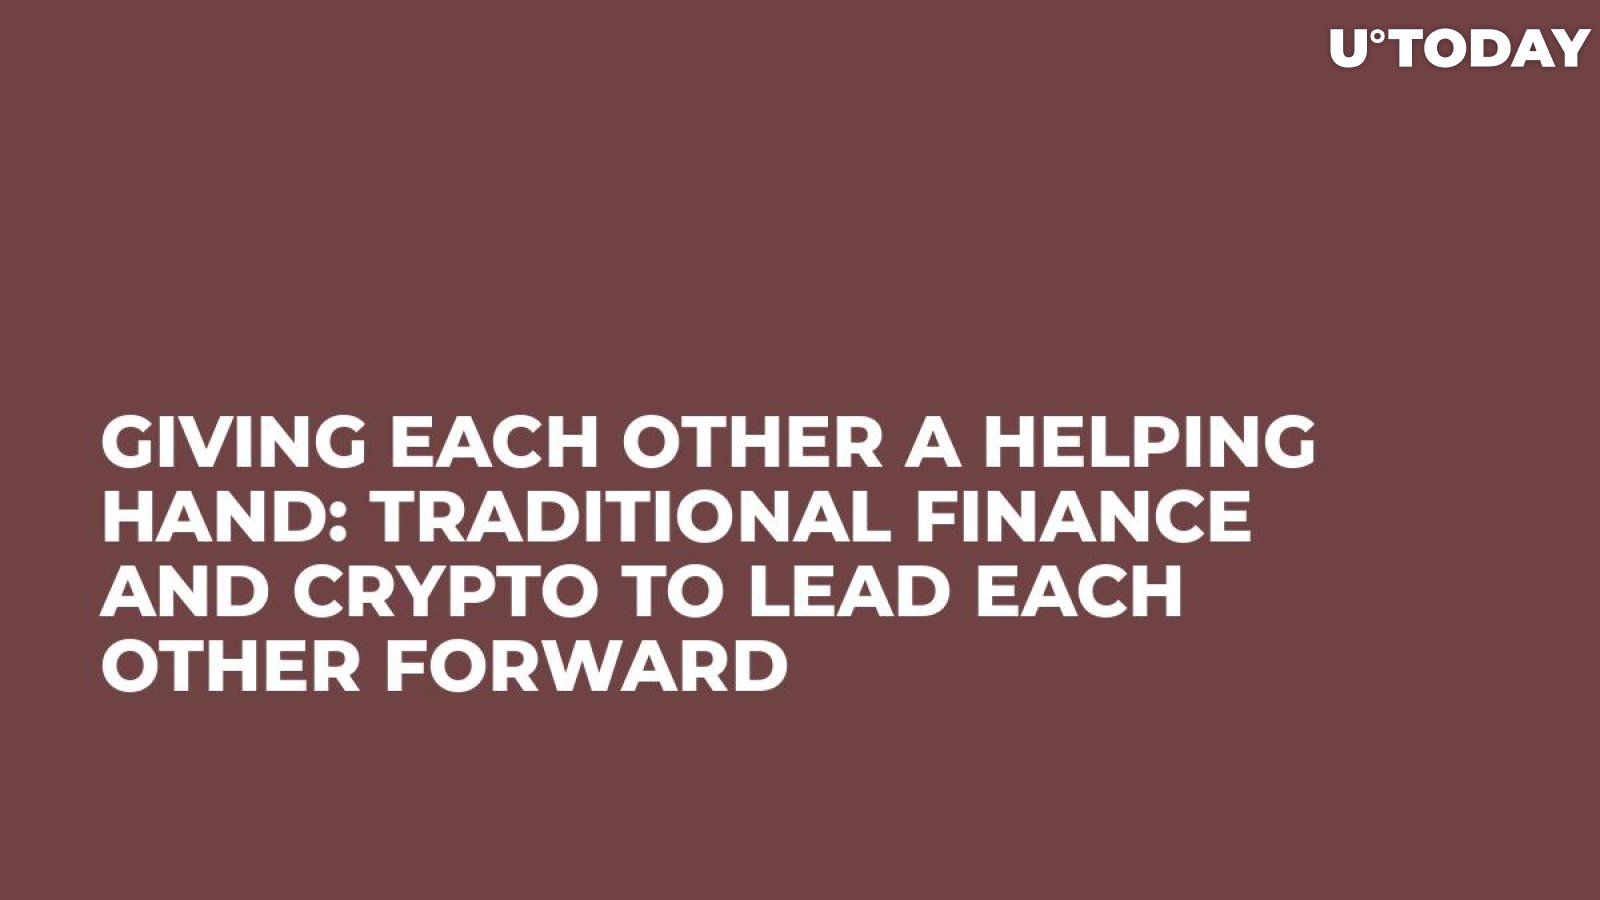 Giving Each Other a Helping Hand: Traditional Finance and Crypto to Lead Each Other Forward